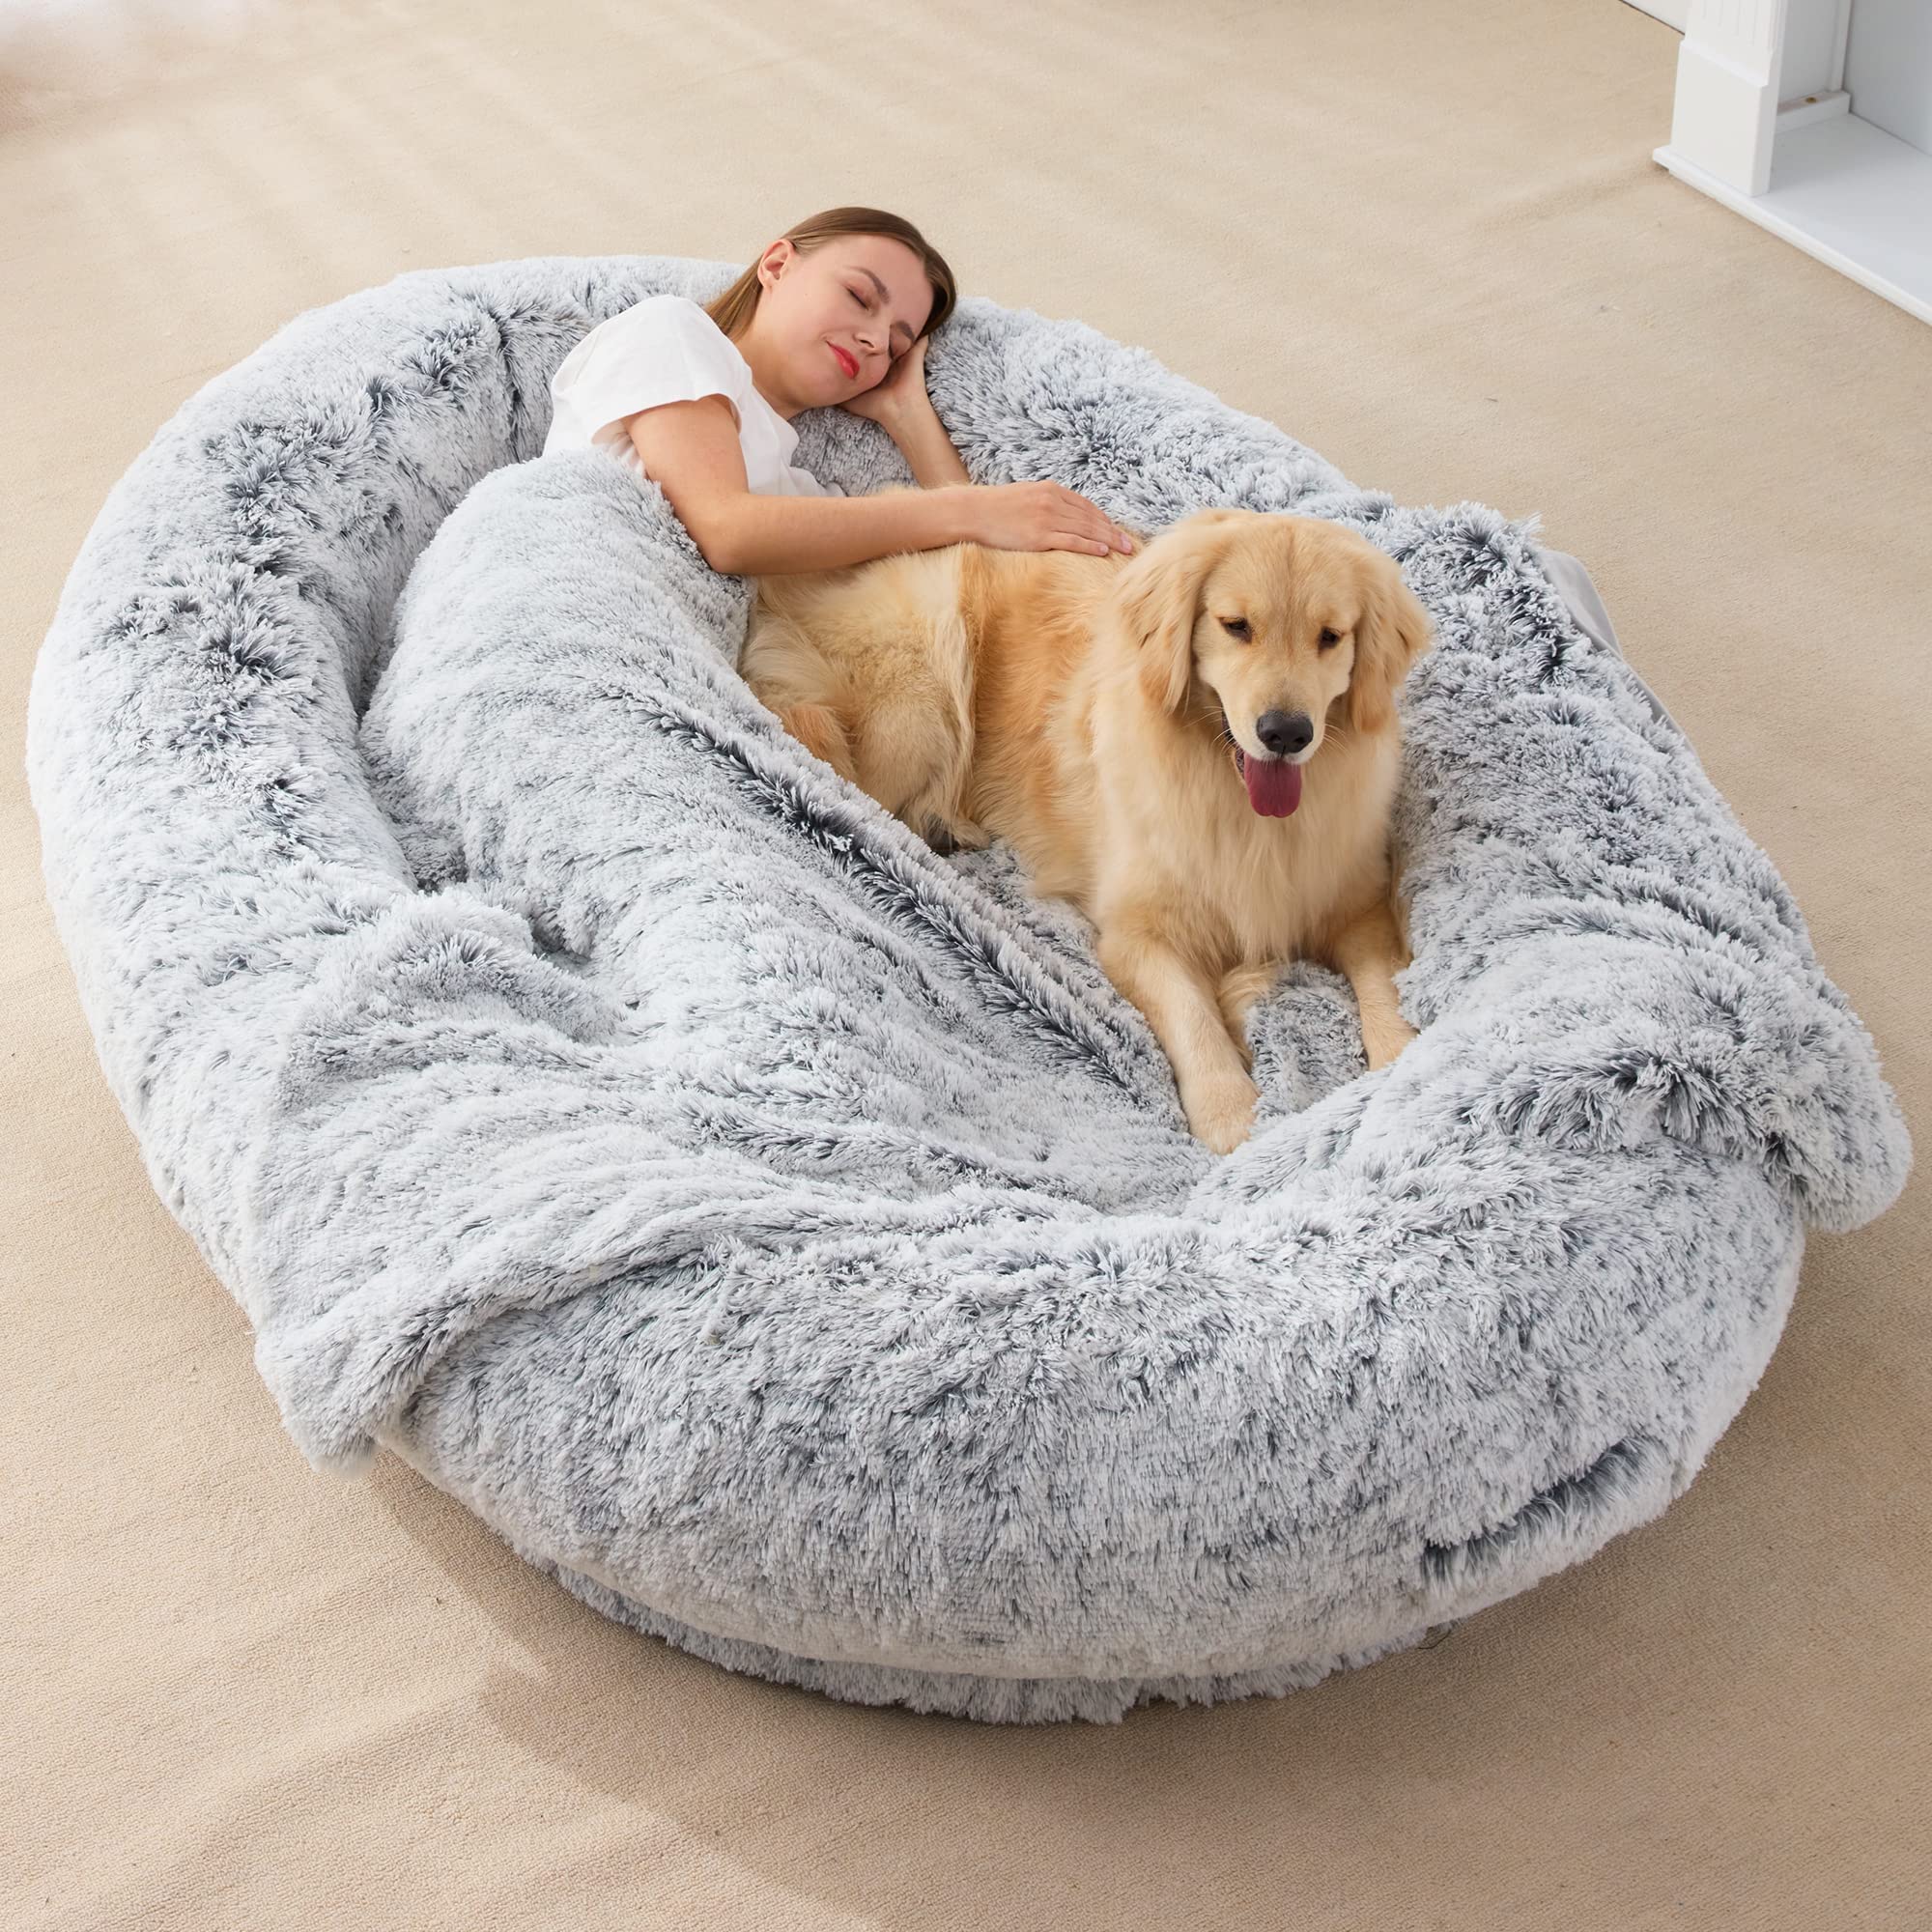 Comfort: Human-Sized Dog Bed for Your Furry Friend插图2